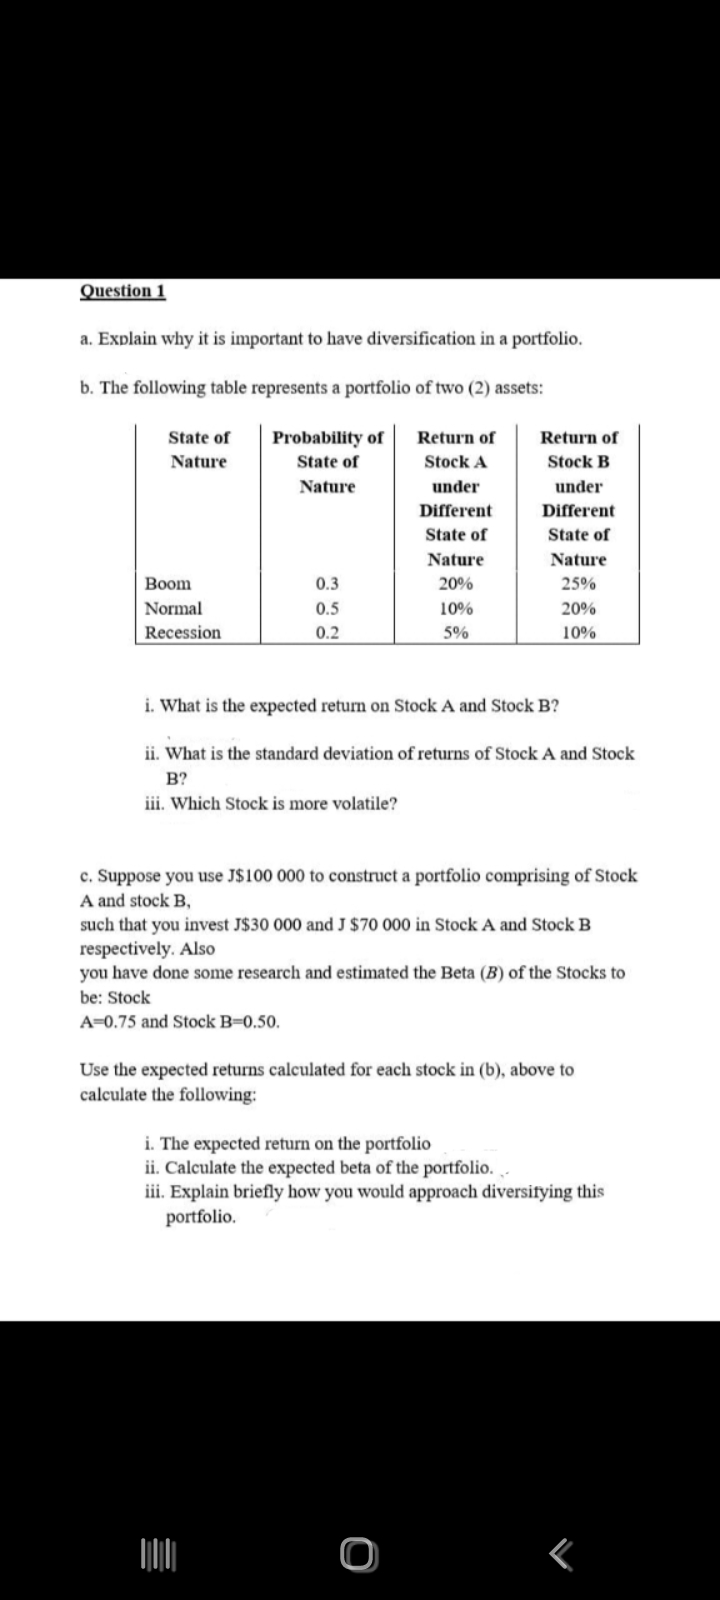 Question 1
a. Explain why it is important to have diversification in a portfolio.
b. The following table represents a portfolio of two (2) assets:
State of
Probability of
Return of
Return of
Nature
State of
Stock
Stock B
Nature
under
under
Different
Different
State of
State of
Nature
Nature
Вoom
0.3
20%
25%
Normal
0.5
10%
20%
Recession
0.2
5%
10%
i. What is the expected return on Stock A and Stock B?
ii. What is the standard deviation of returns of Stock A and Stock
B?
iii. Which Stock is more volatile?
c. Suppose you use J$100 000 to construct a portfolio comprising of Stock
A and stock B,
such that you invest J$30 000 and J $70 000 in Stock A and Stock B
respectively. Also
you have done some research and estimated the Beta (B) of the Stocks to
be: Stock
A=0.75 and Stock B=0.50.
Use the expected returns calculated for each stock in (b), above to
calculate the following:
i. The expected return on the portfolio
ii. Calculate the expected beta of the portfolio. ,
iii. Explain briefly how you would approach diversifying this
portfolio.
